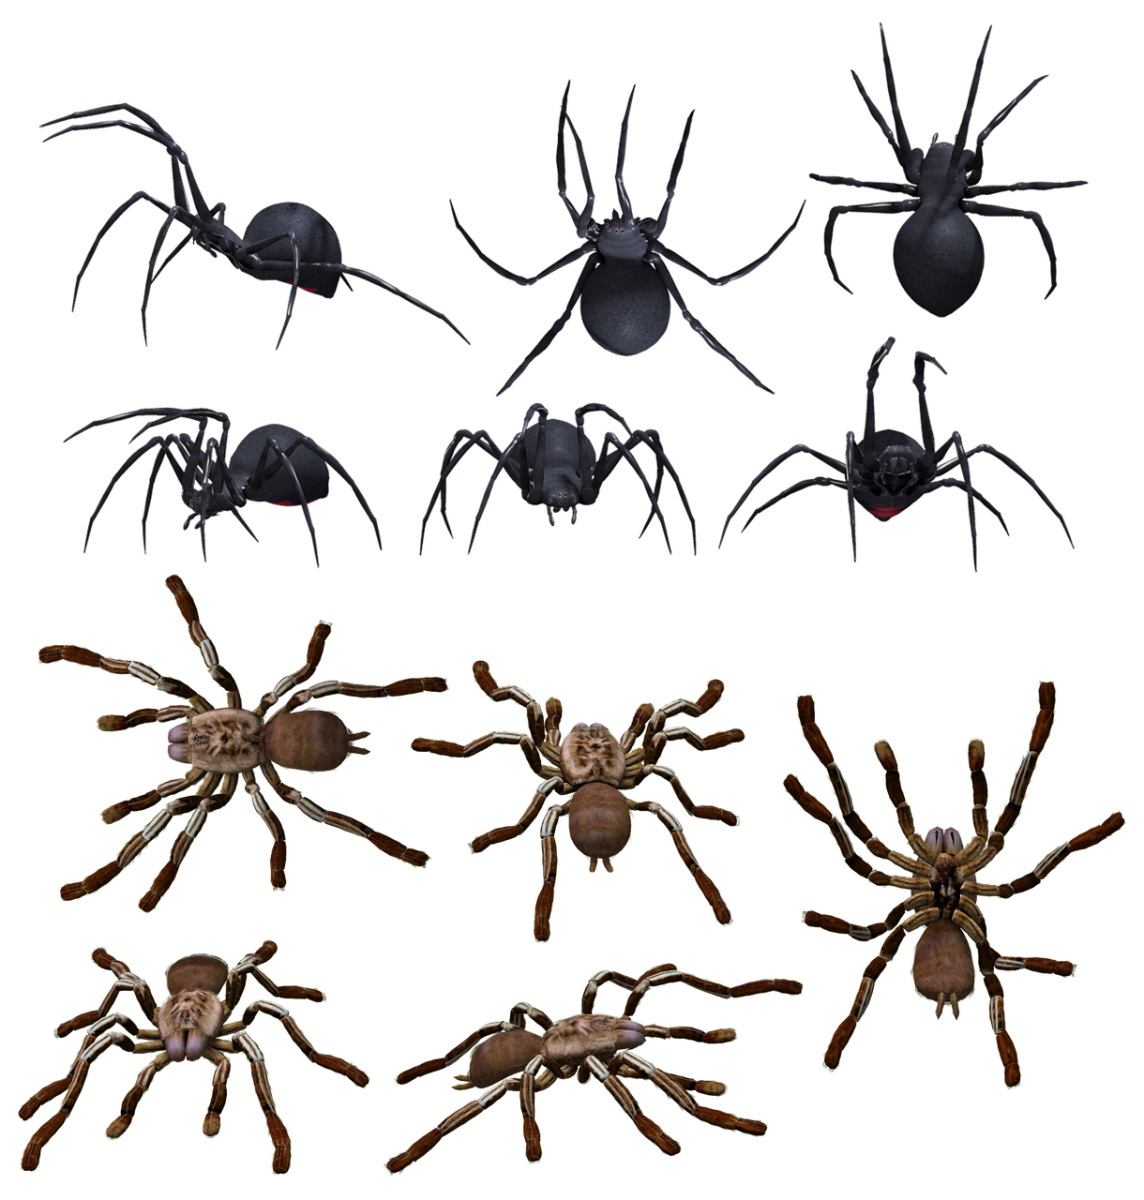 All Spiders Chart